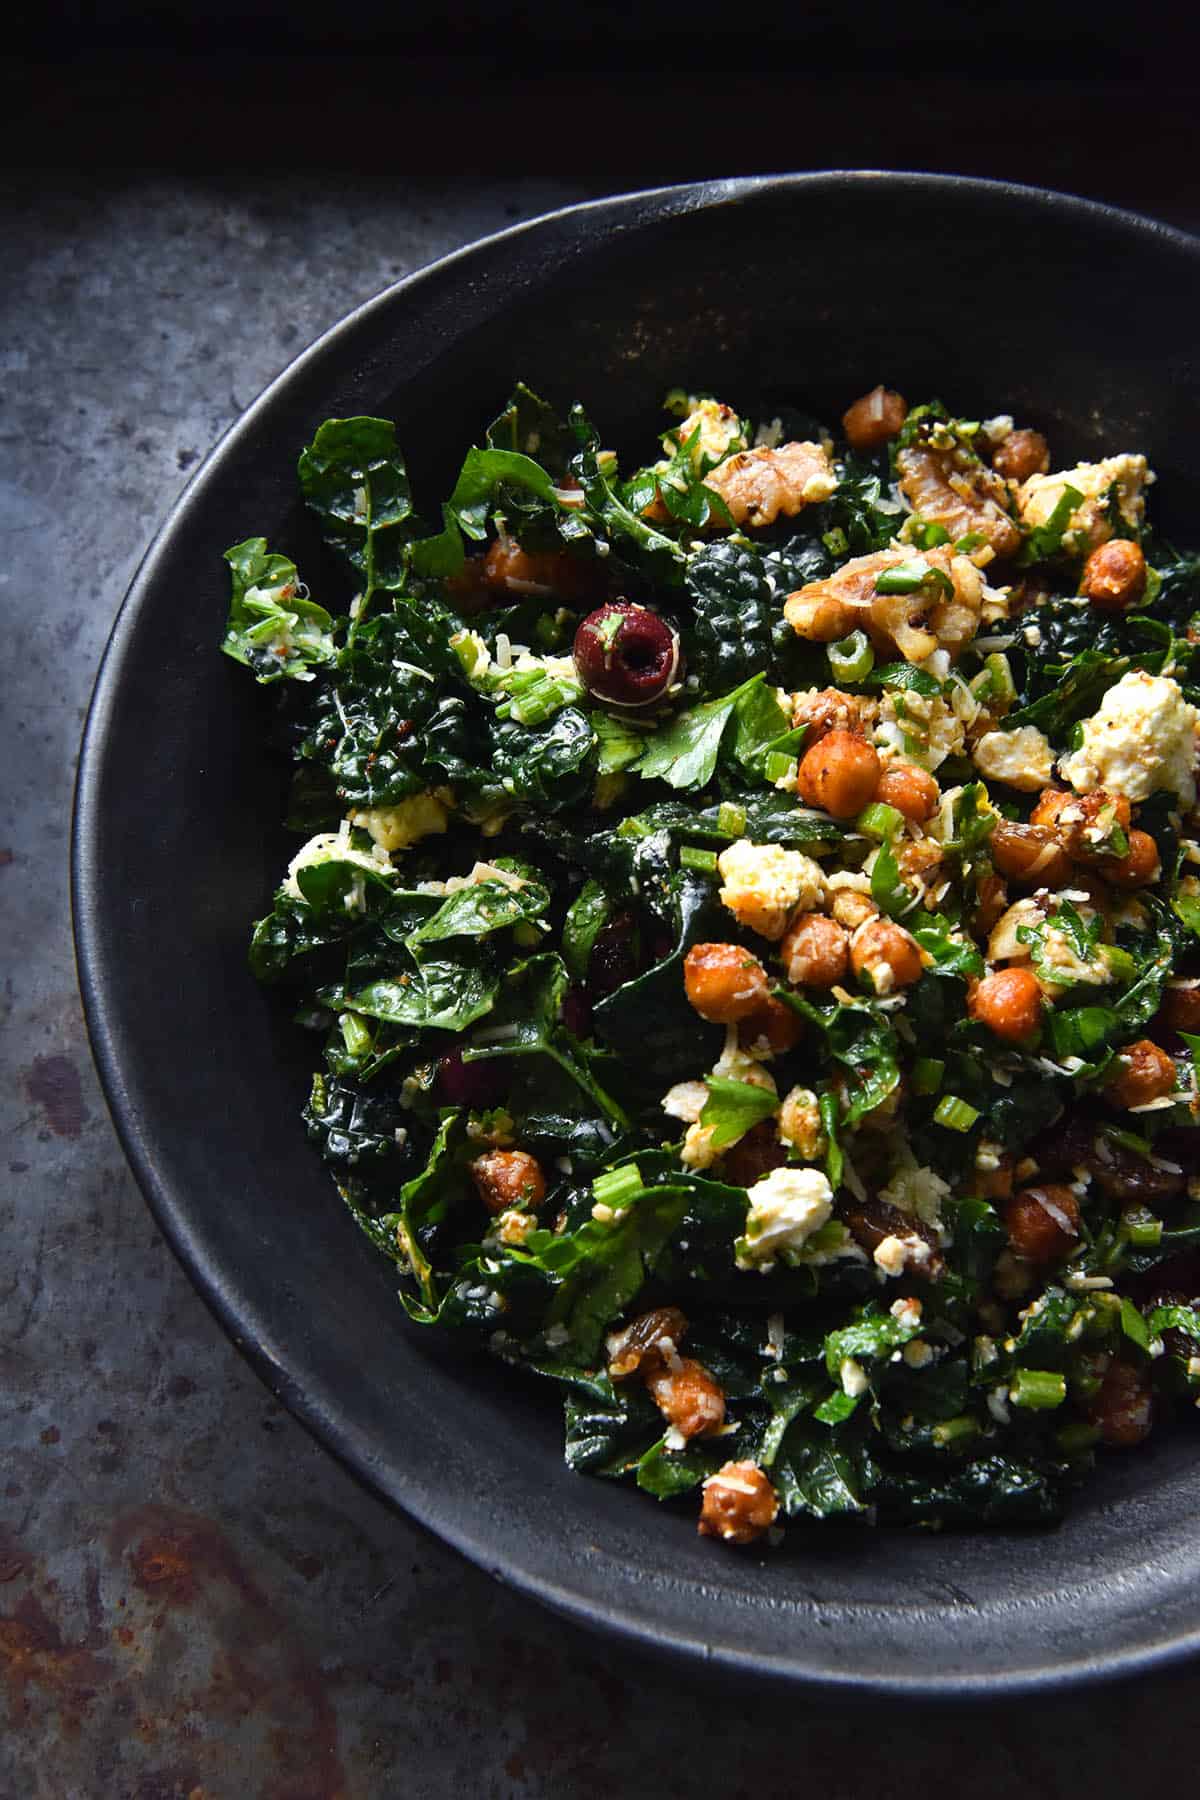 A darker image of a grey ceramic bowl filled with a kale, crispy chickpea, feta and raisin salad. The salad is piled into the bowl which sits atop a dark mottled grey background.